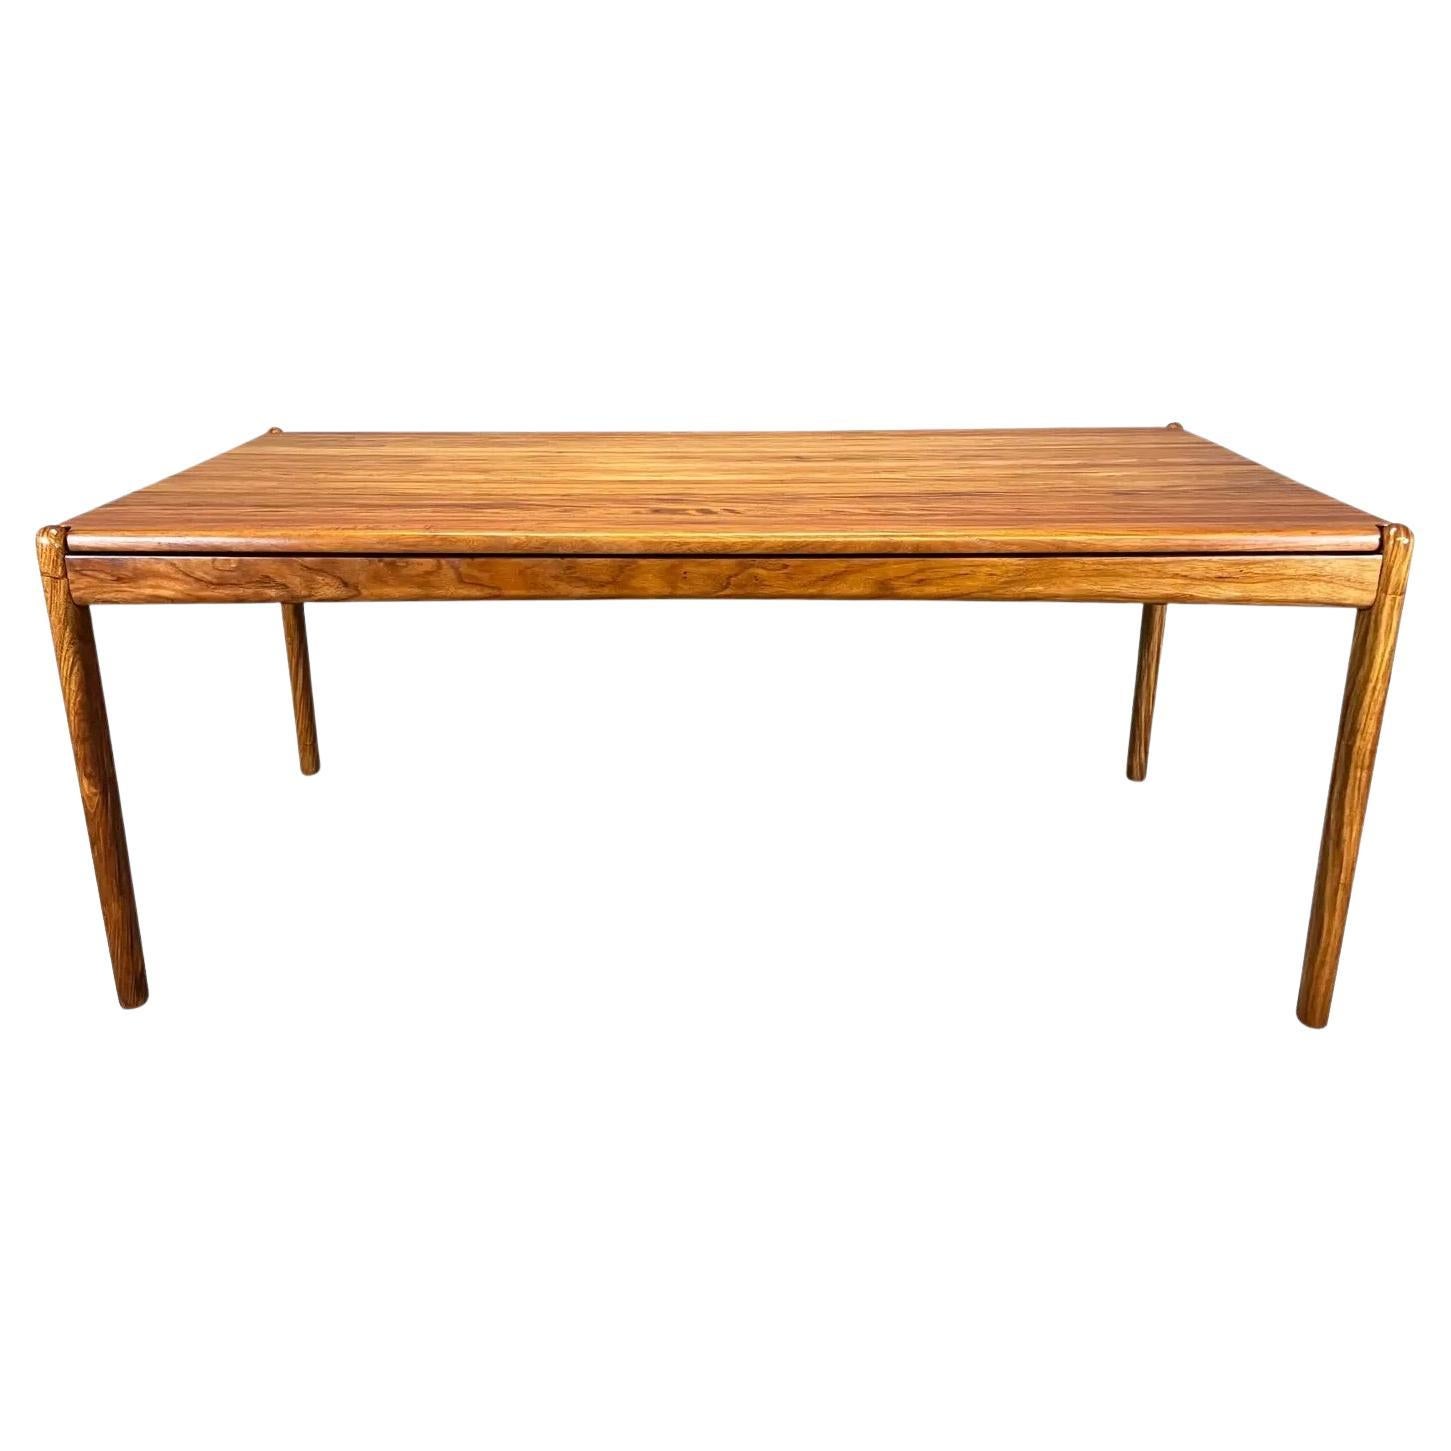 Vintage Danish Mid Century Modern Solid Mahogany Dining Table For Sale